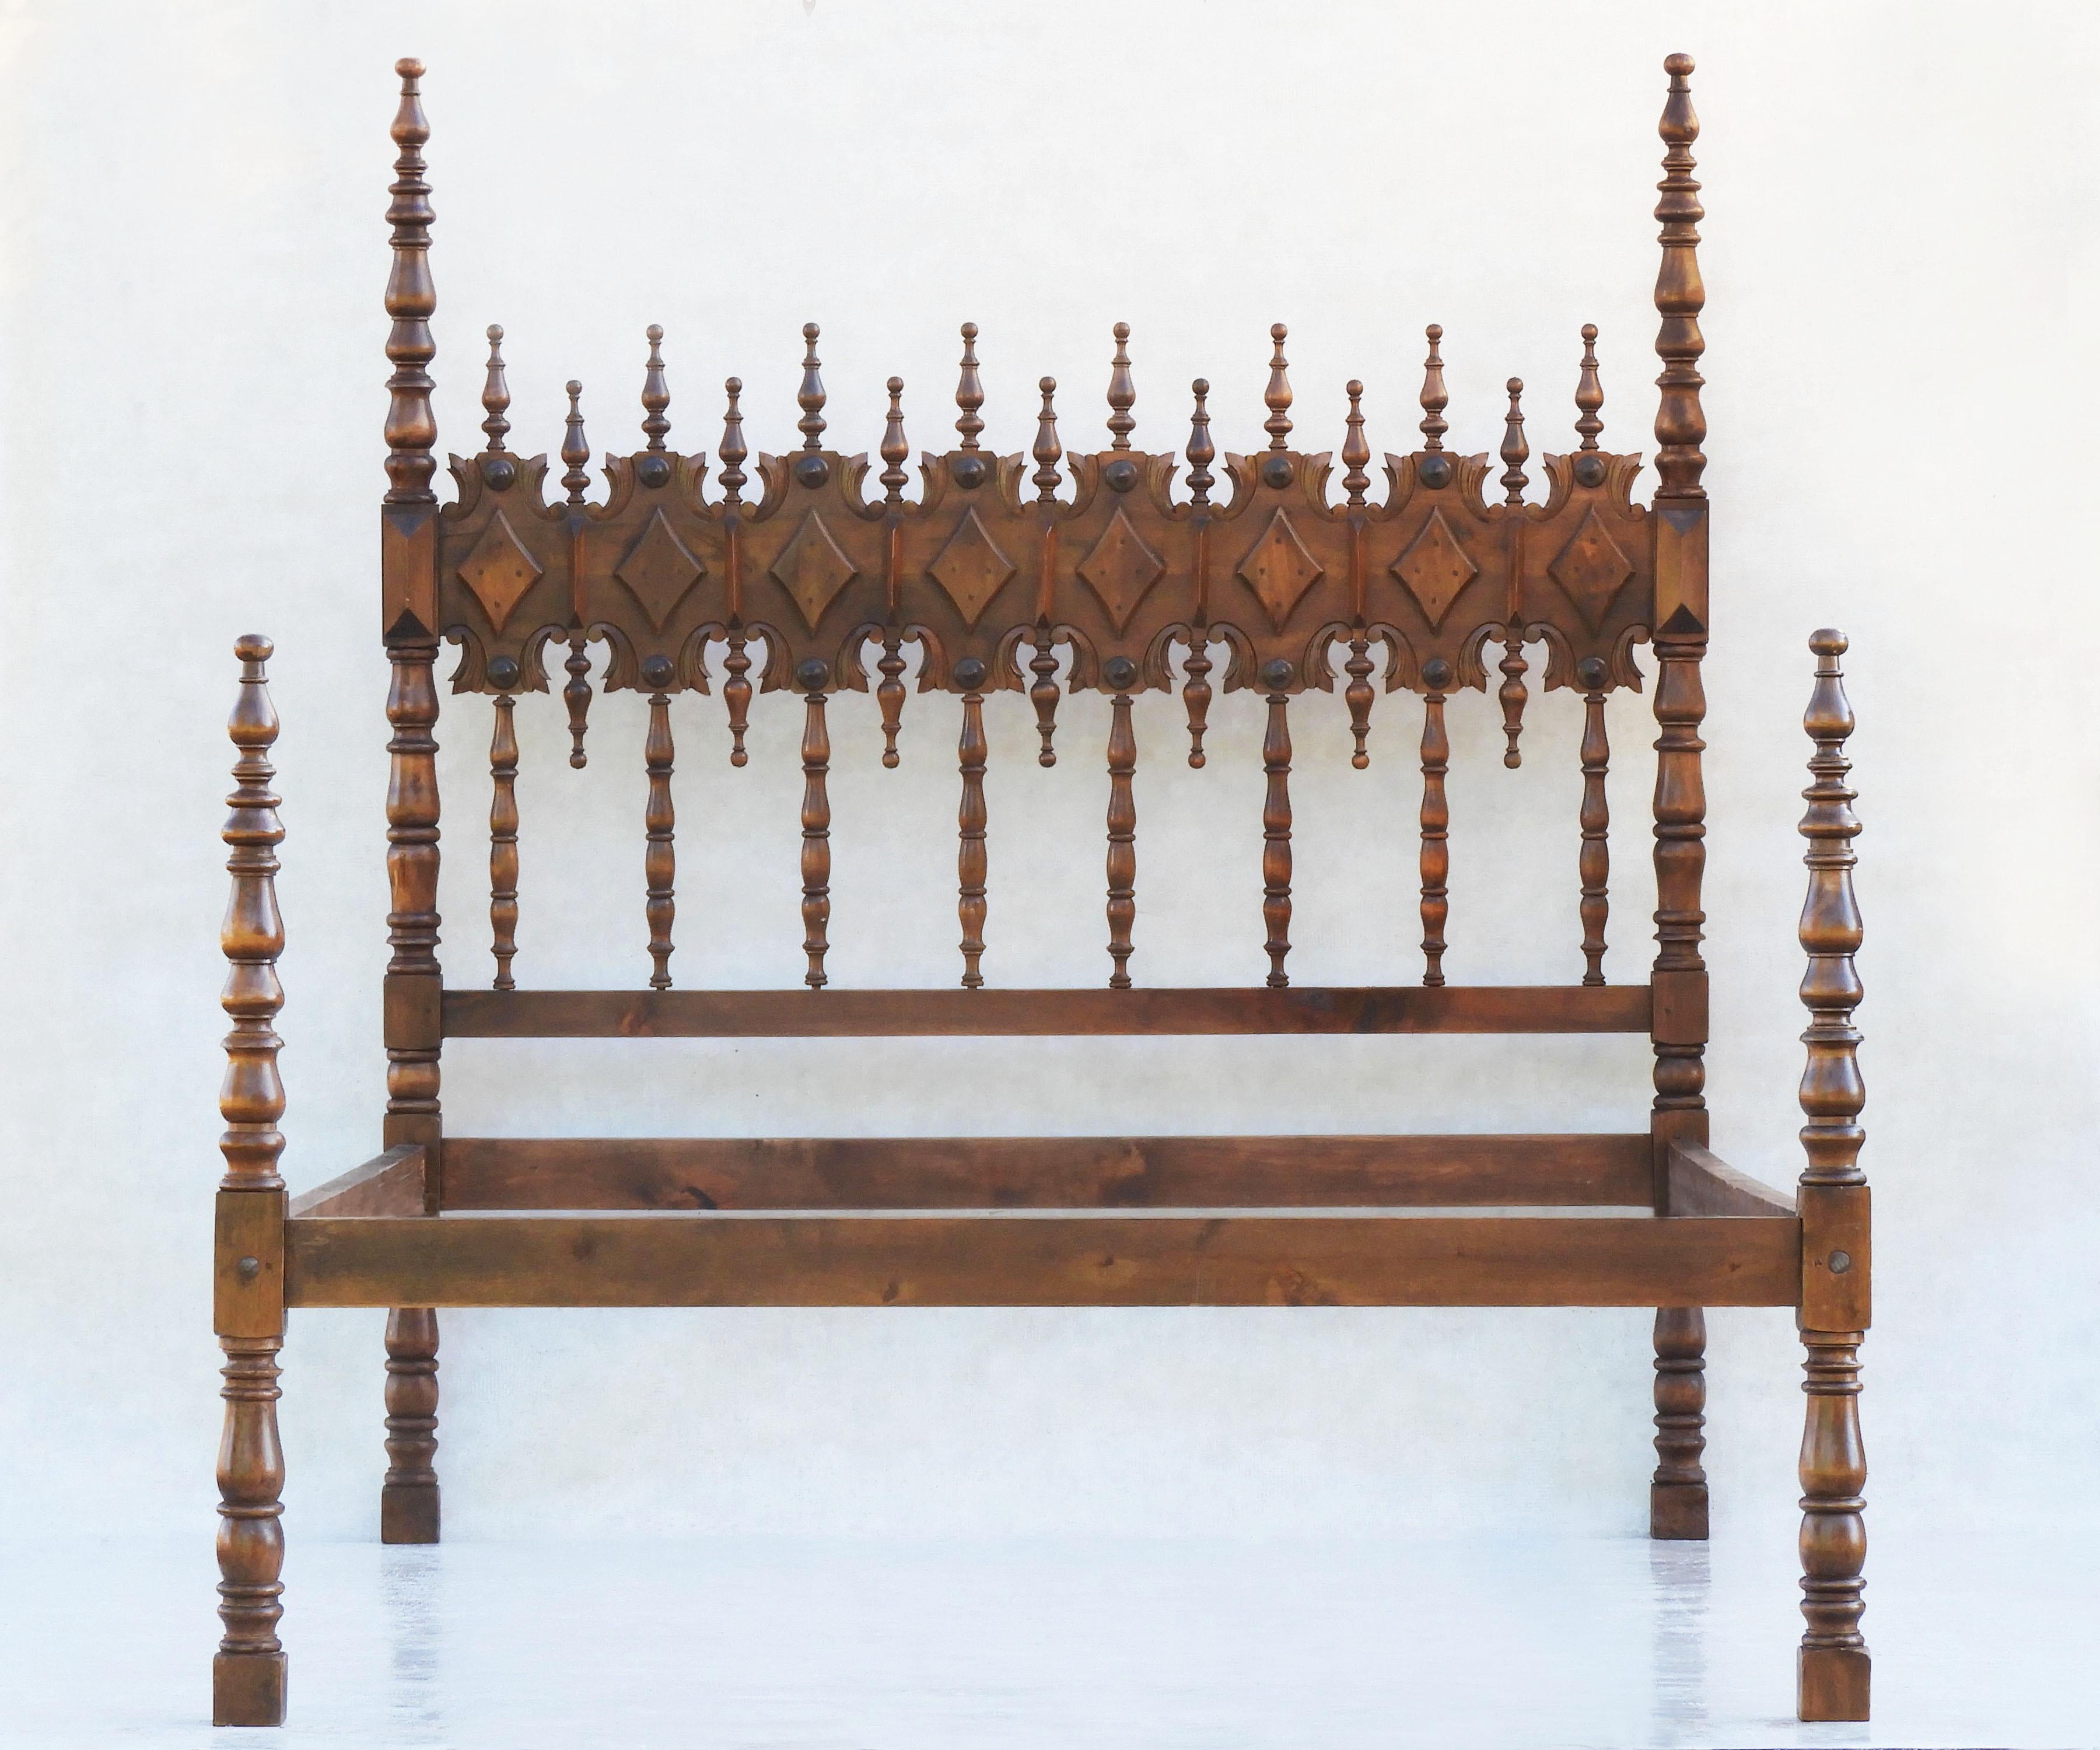 Provincial Spanish four-poster bed with carved medallions and spindle turned wood C1950s

Stunning mid-20th century bed from Toledo in the Castilian region of Spain.
Specially commissioned, Artisan crafted bed, beautifully carved in Fruitwood and